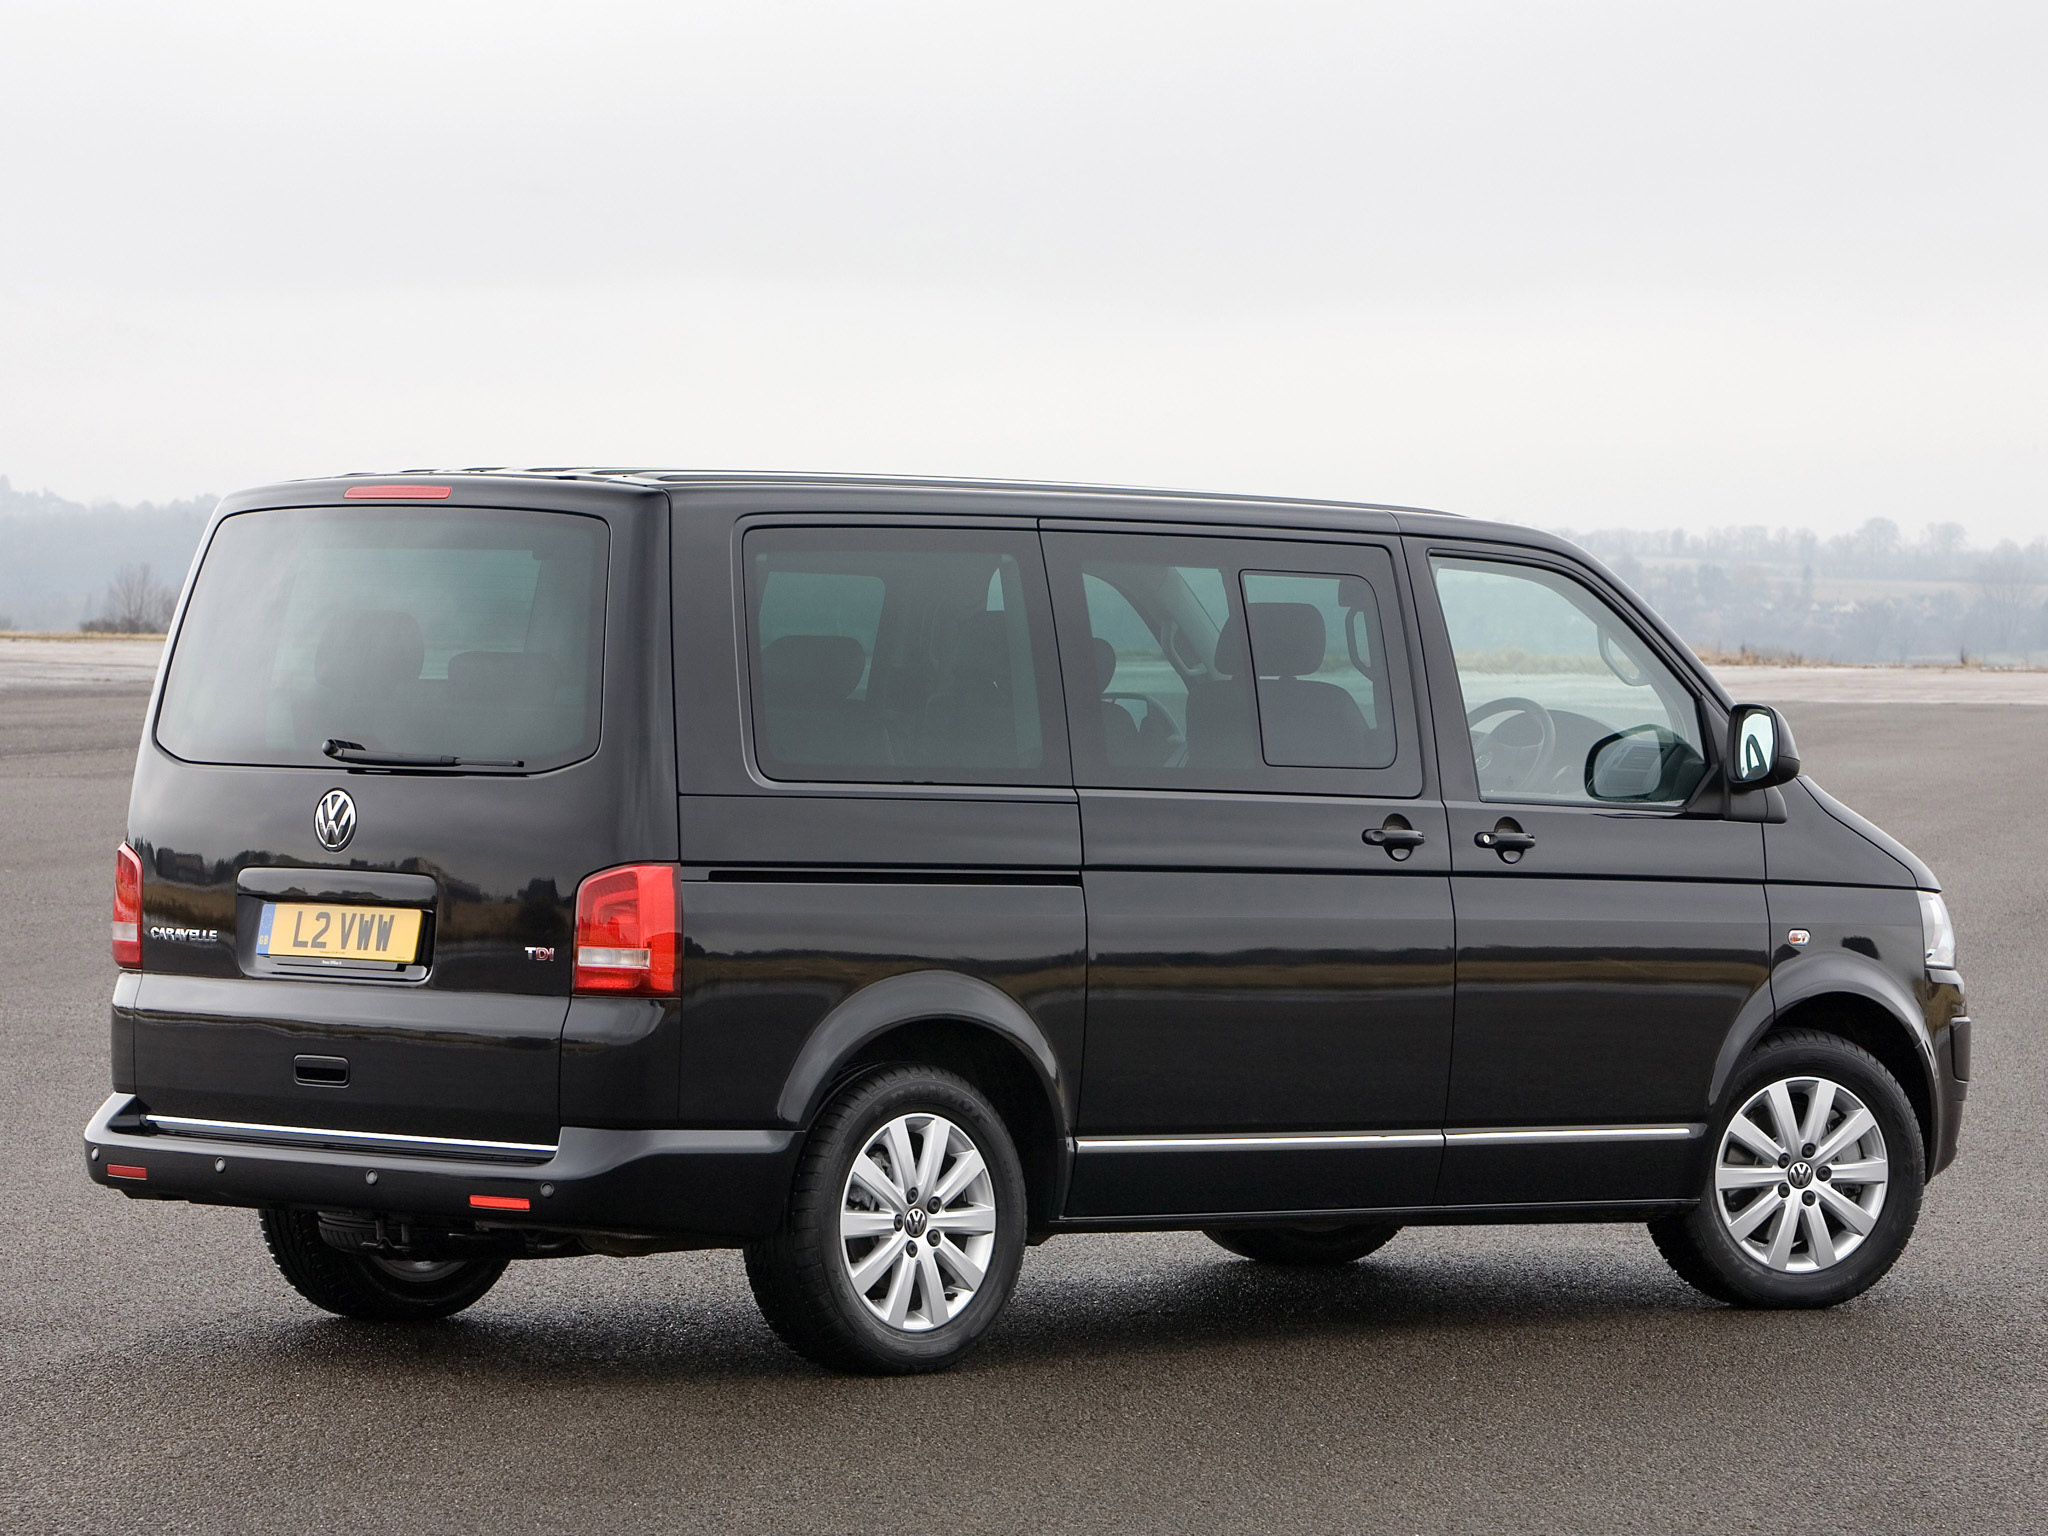 VW T5 Caravelle technical details, history, photos on